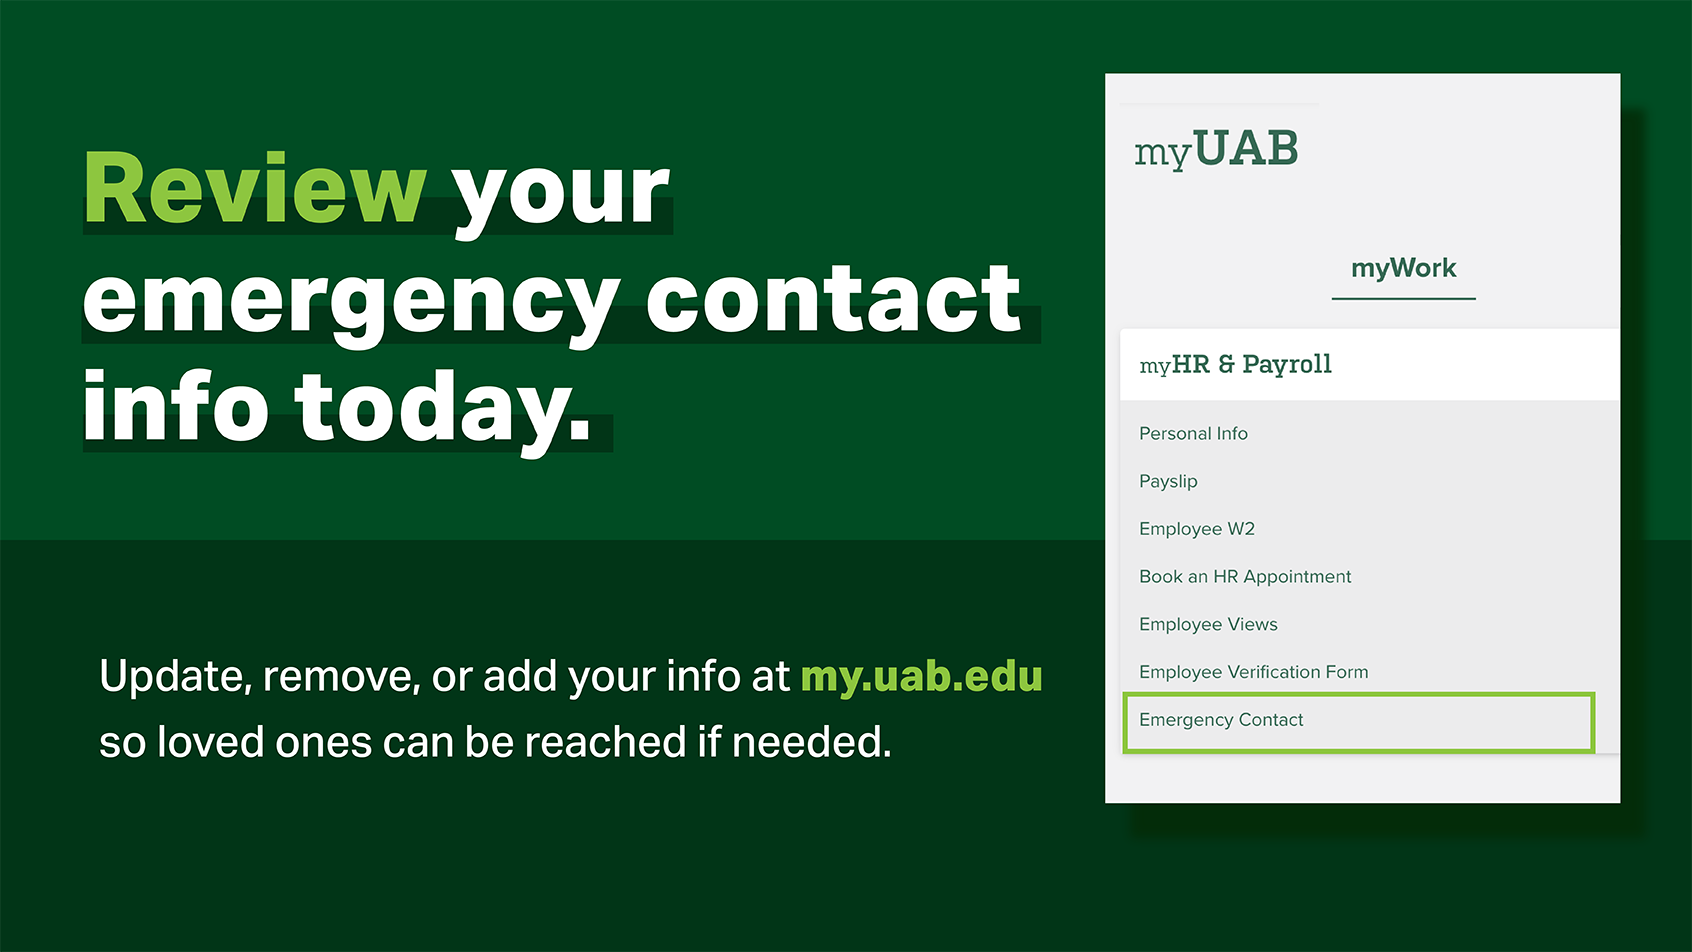 Review your emergency contact info today. Update, remove, or add your info at my.uab.edu so loved ones can be reached if needed.